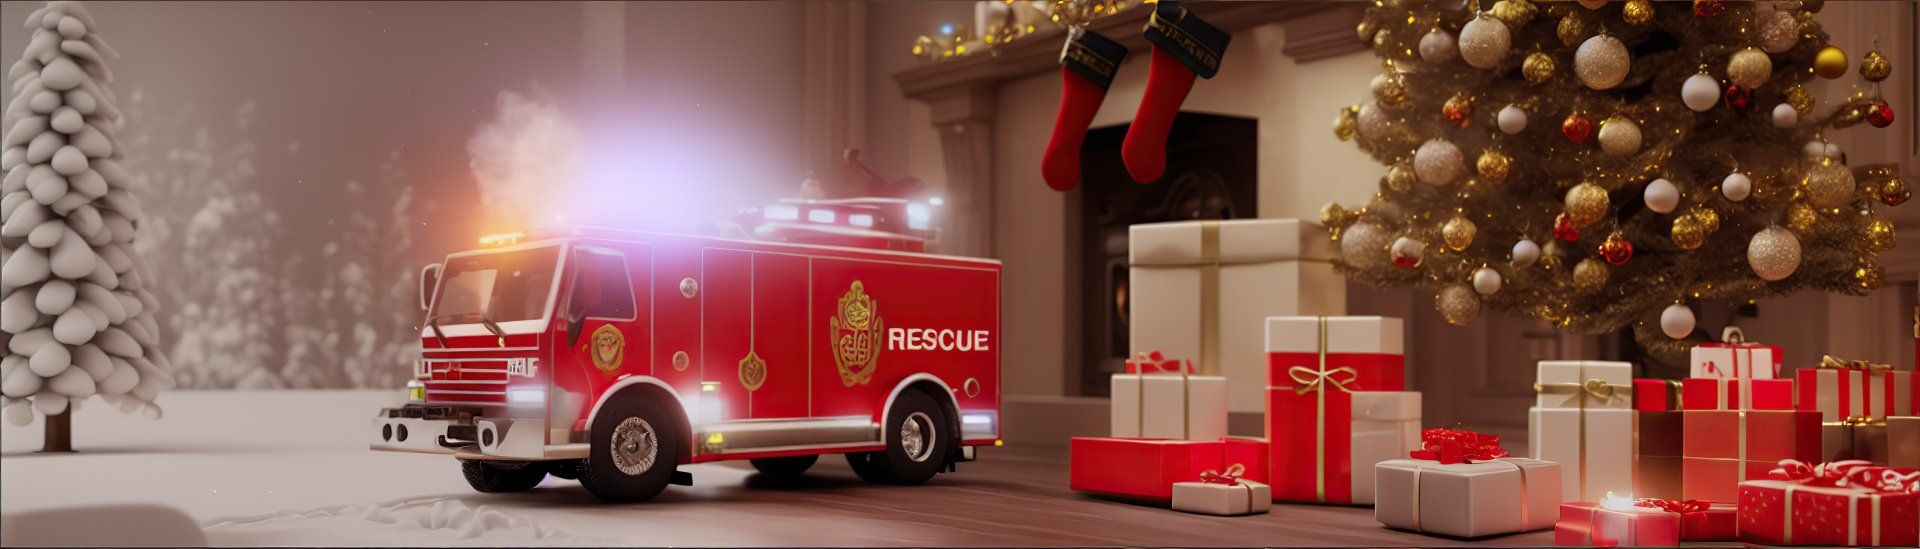 Amalgam of toy fire truck under Christmas tree and real fire truck responding to an emergency.